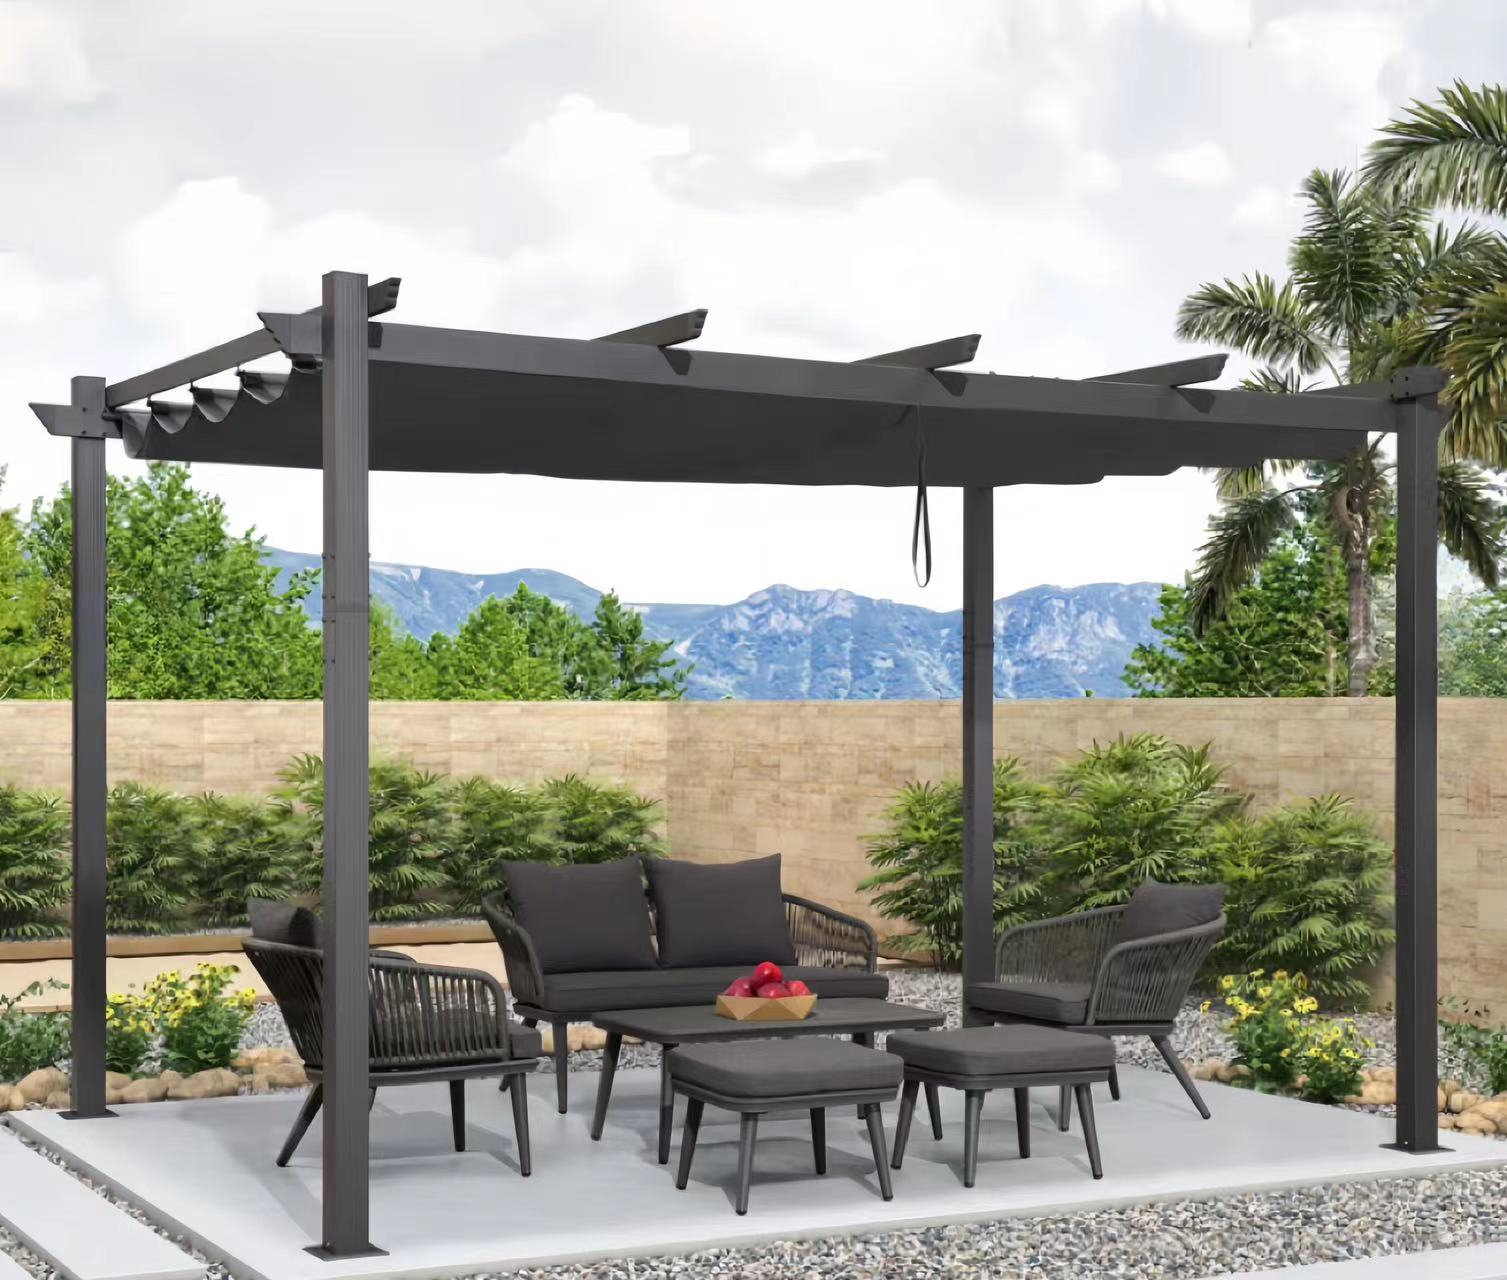 Outdoor Awing AW2302-Metal Pergola with Canopy